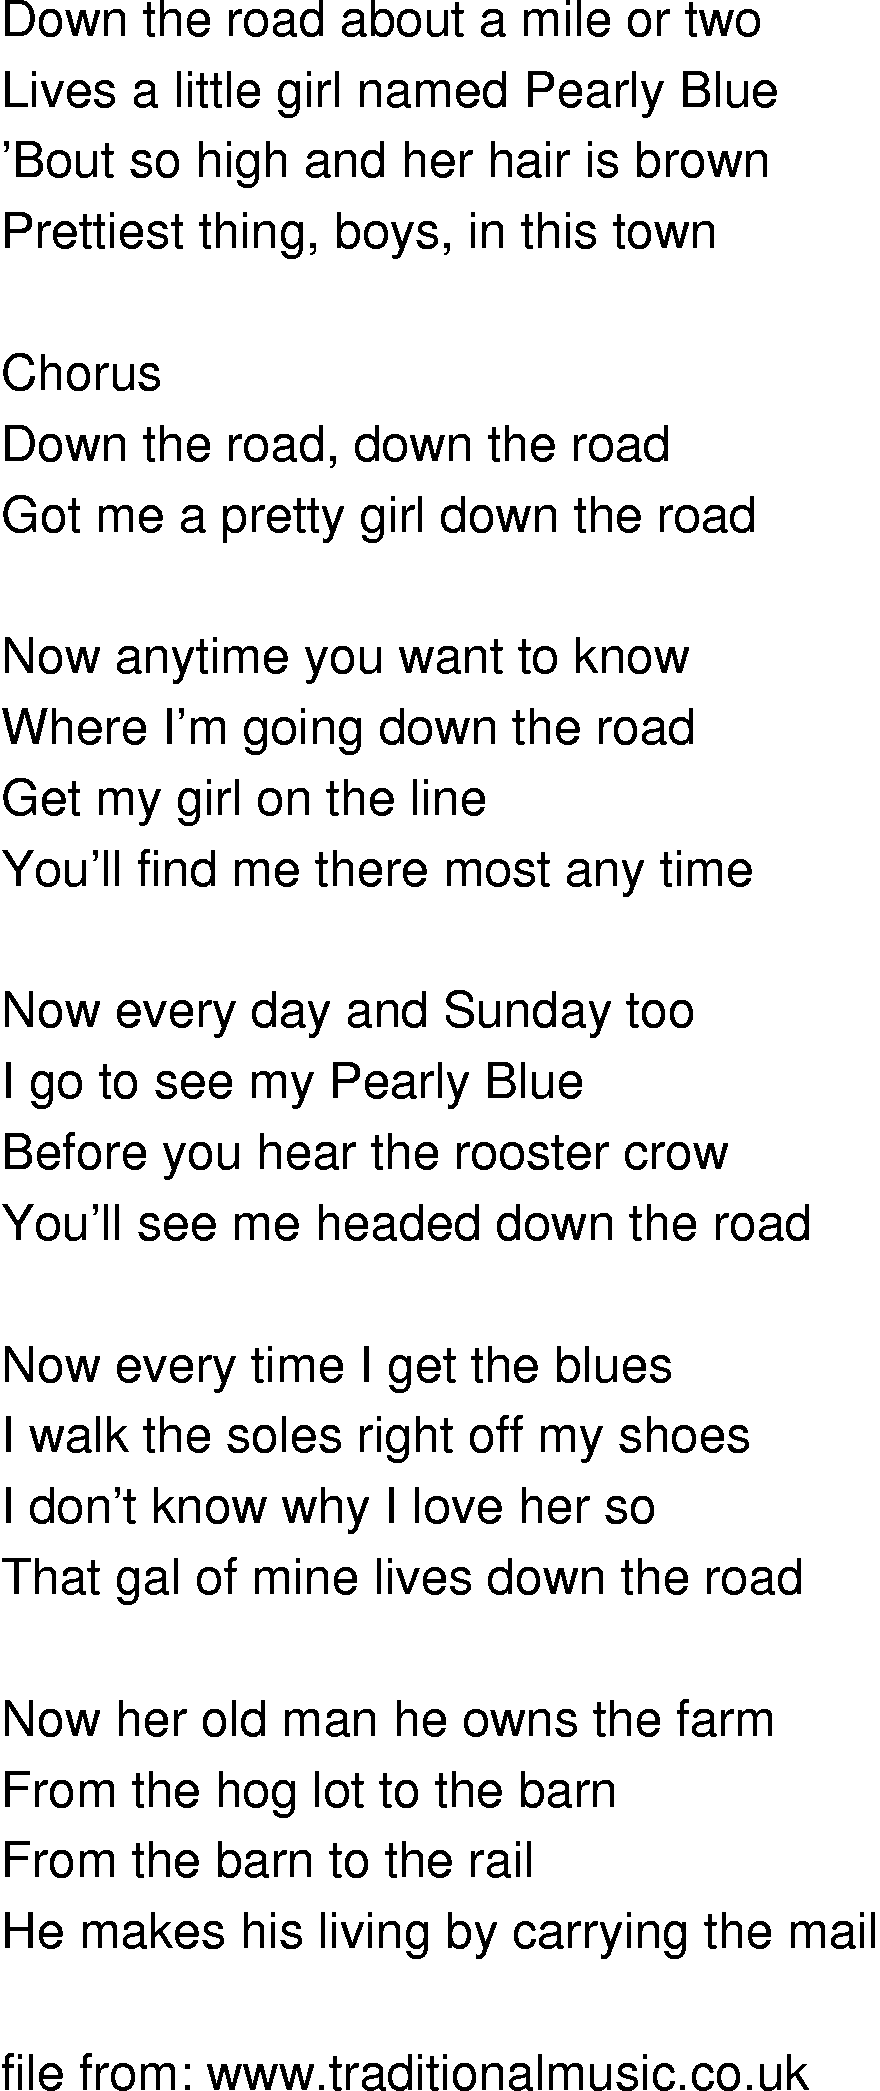 Old-Time (oldtimey) Song Lyrics - down the road